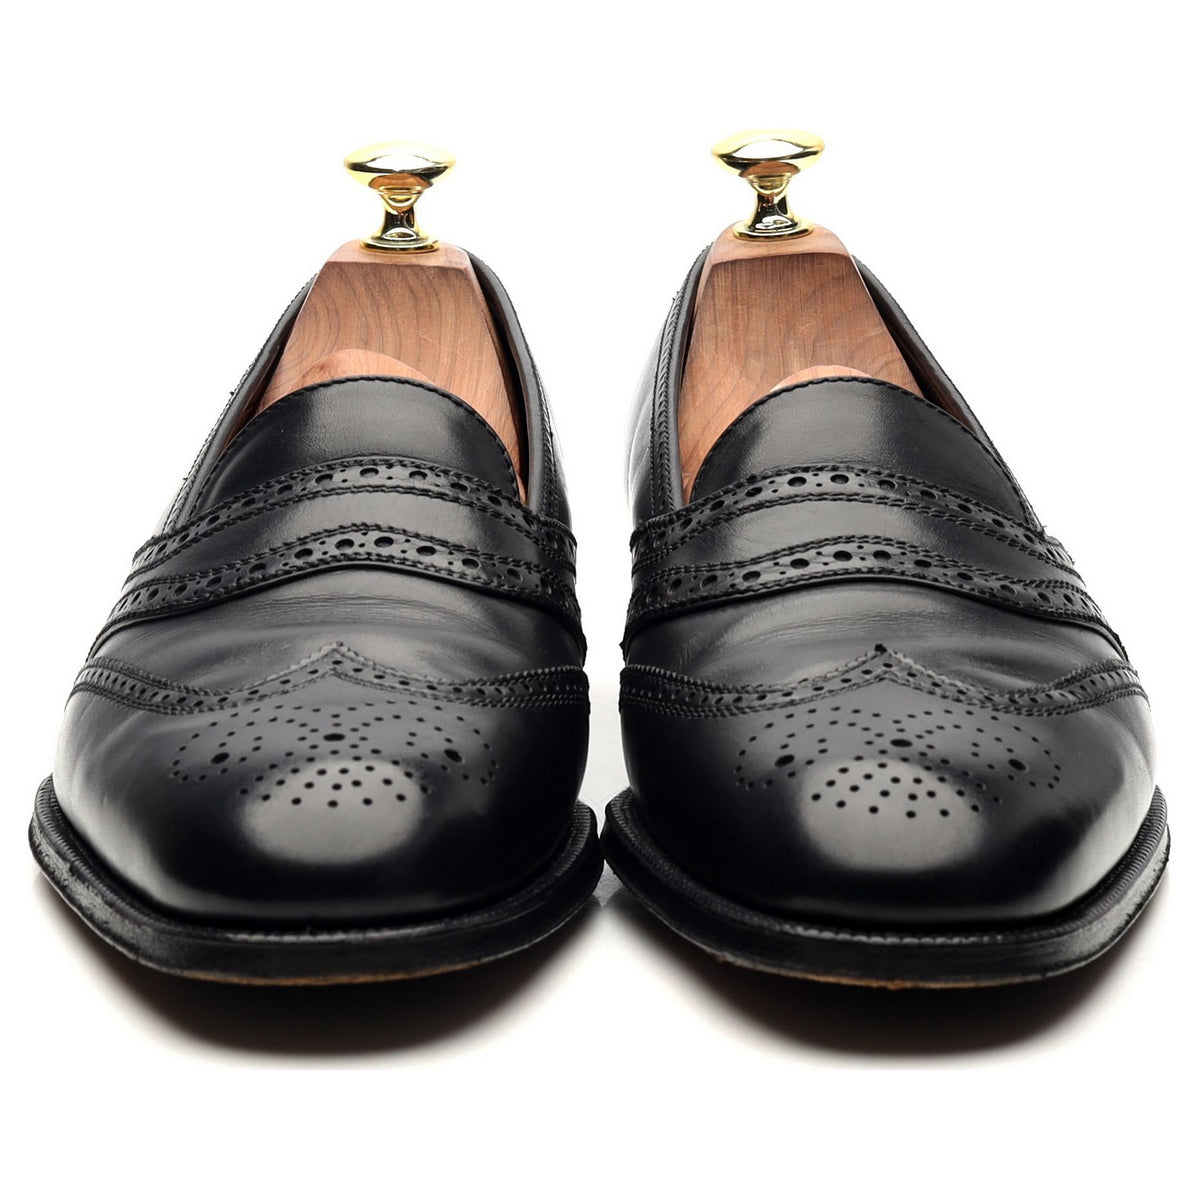 Black Leather Loafers UK 7.5